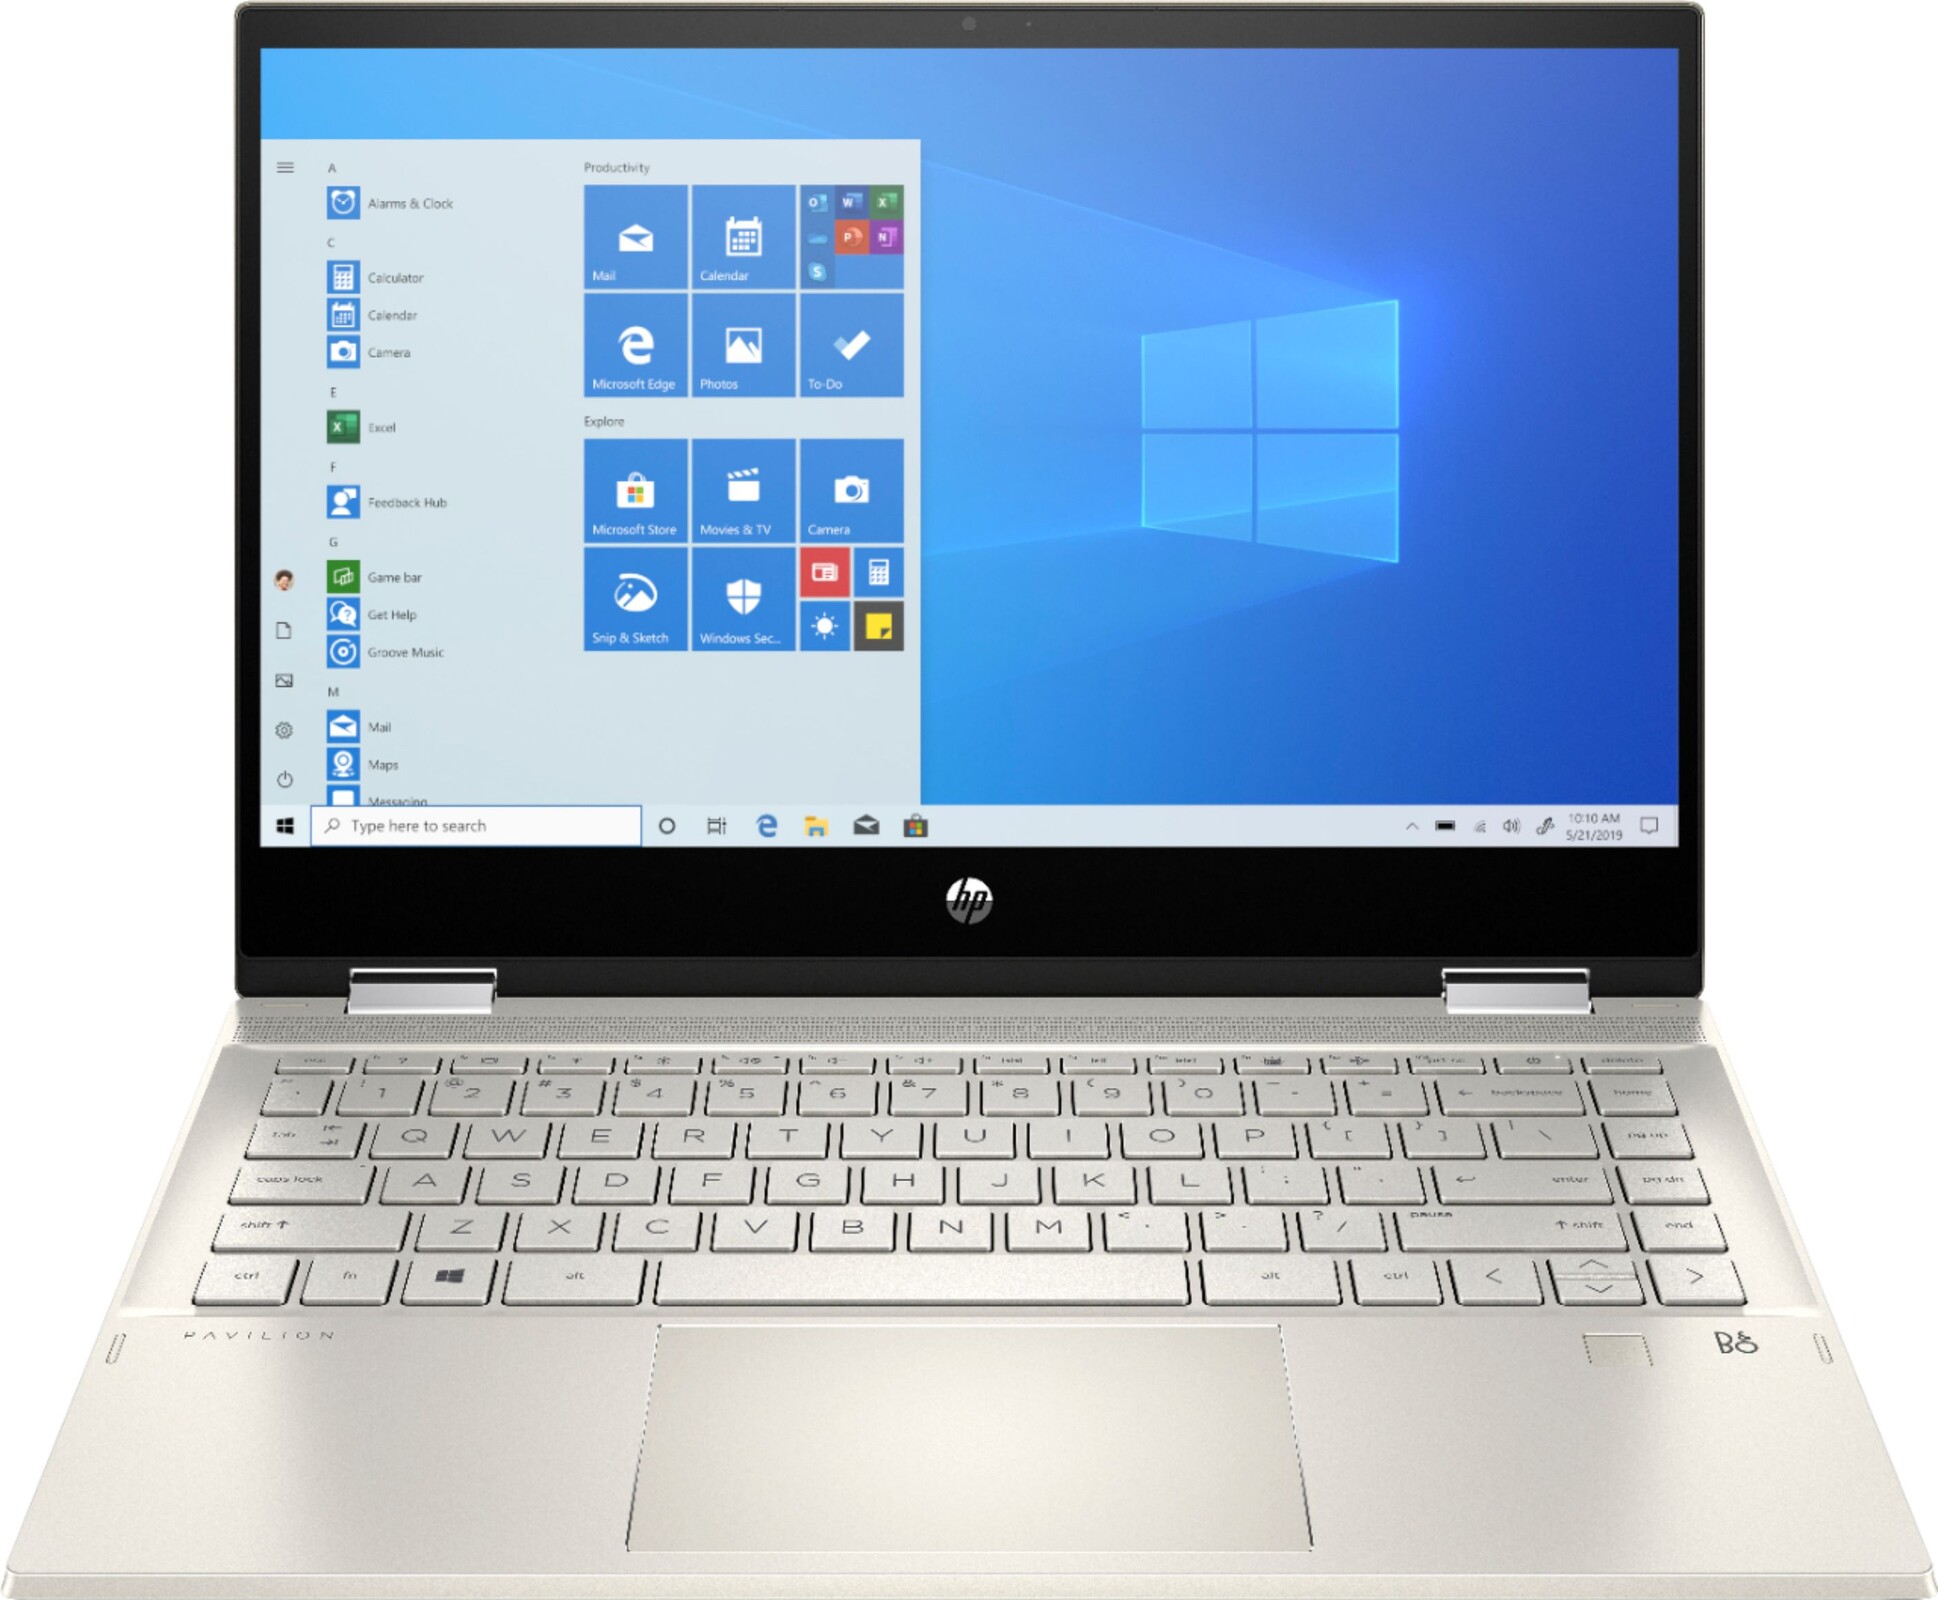 Latest HP Pavilion x360 14 with 10th gen Core i5 CPU, 1080p